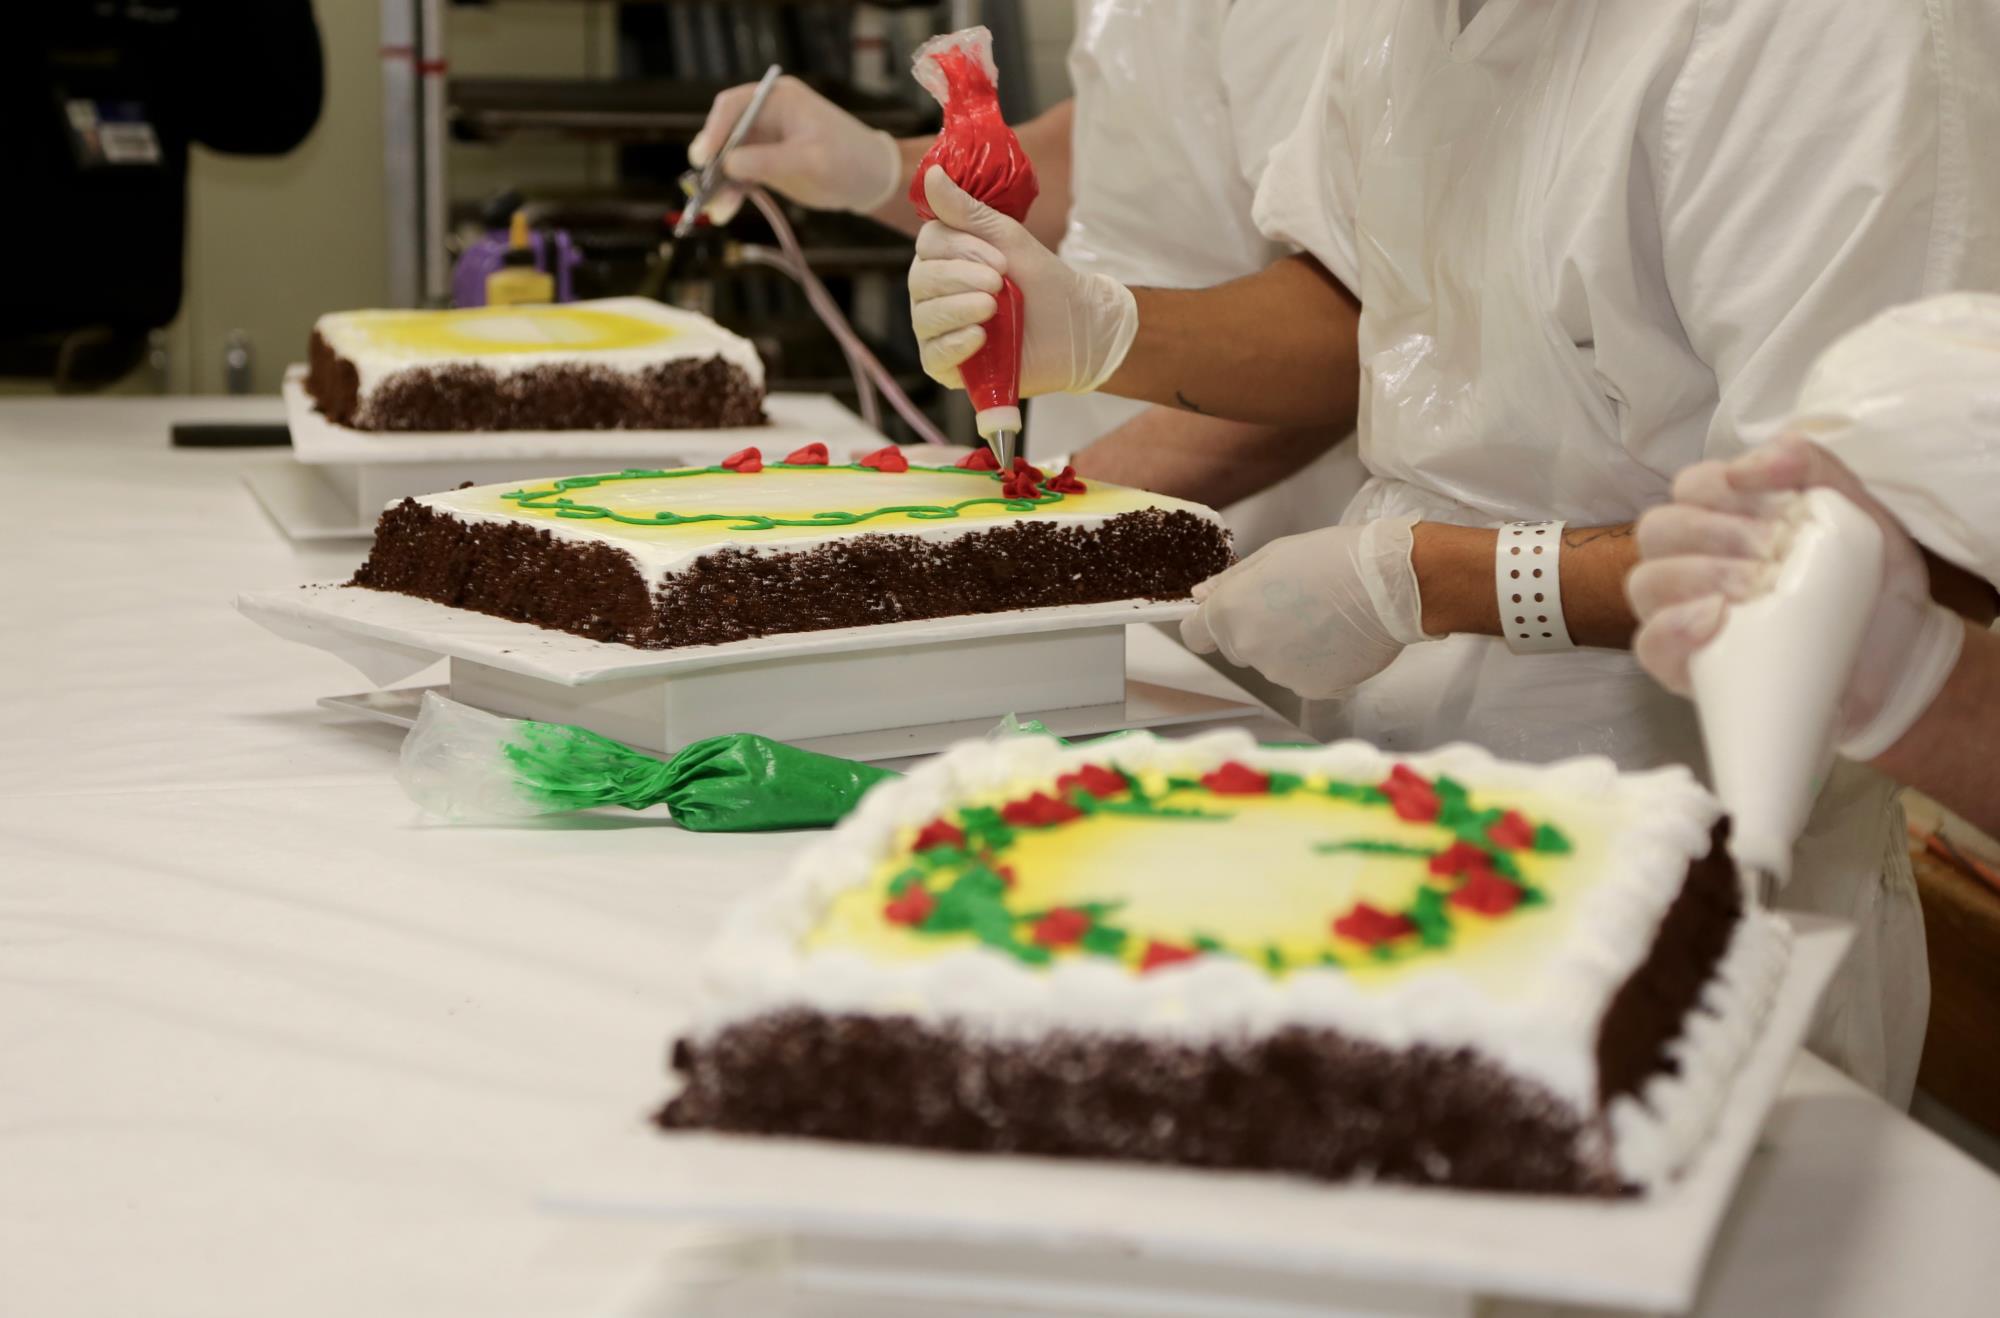 Bakery students at East Mesa decorating a cake